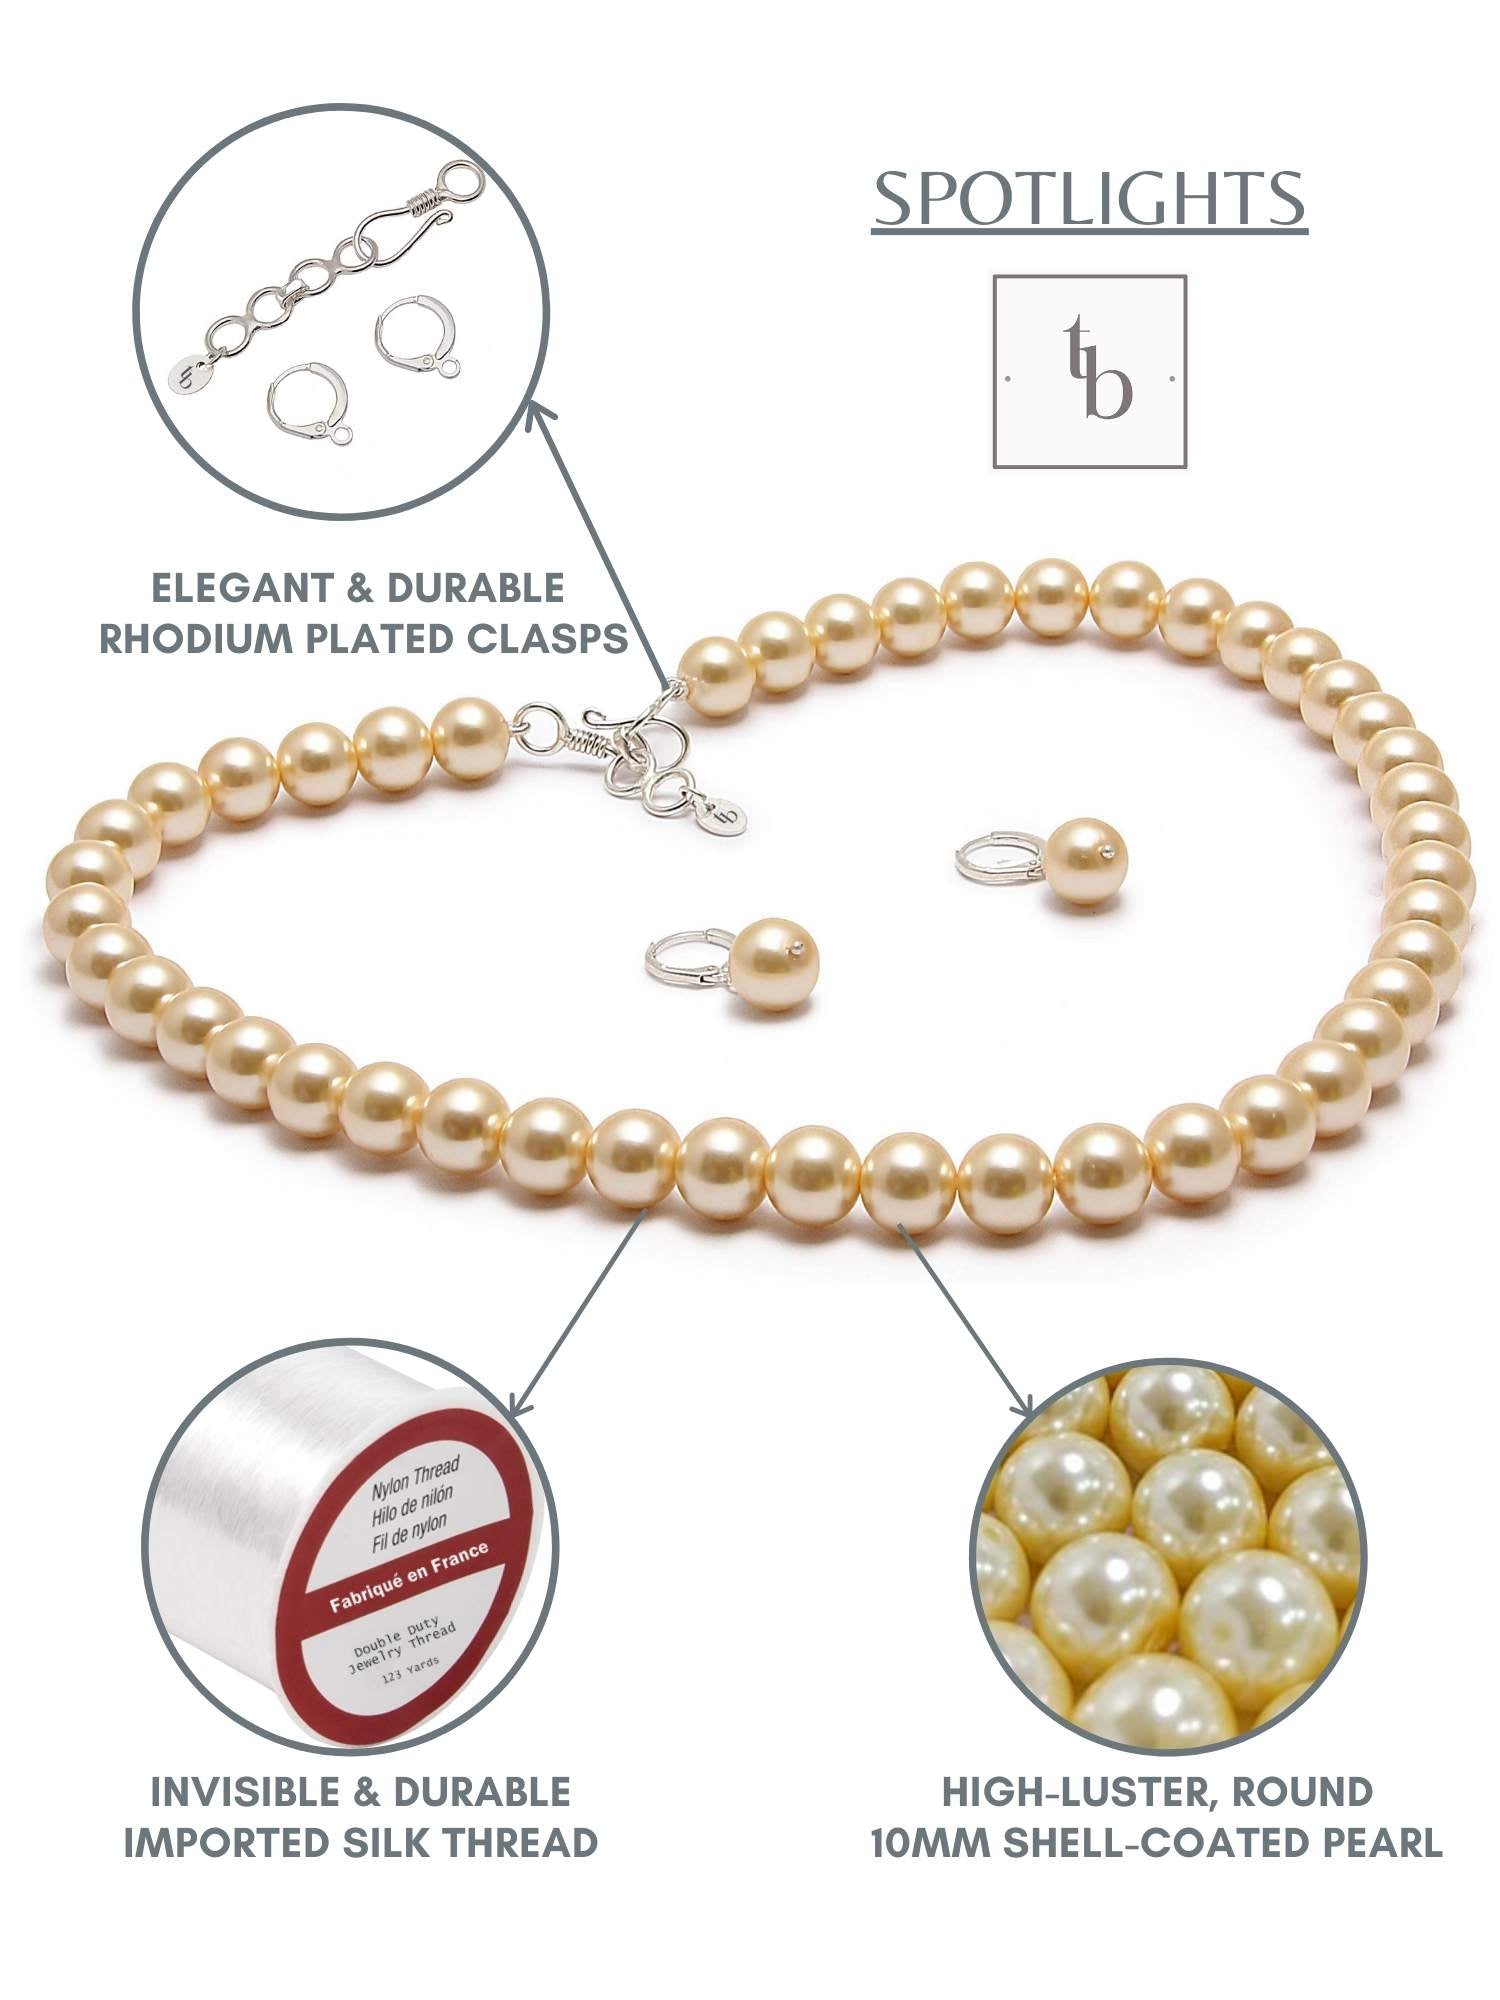 10MM (Big Pearl Size) South Sea Cream Shell-Coated High Luster Pearls Necklace Jewelry Set